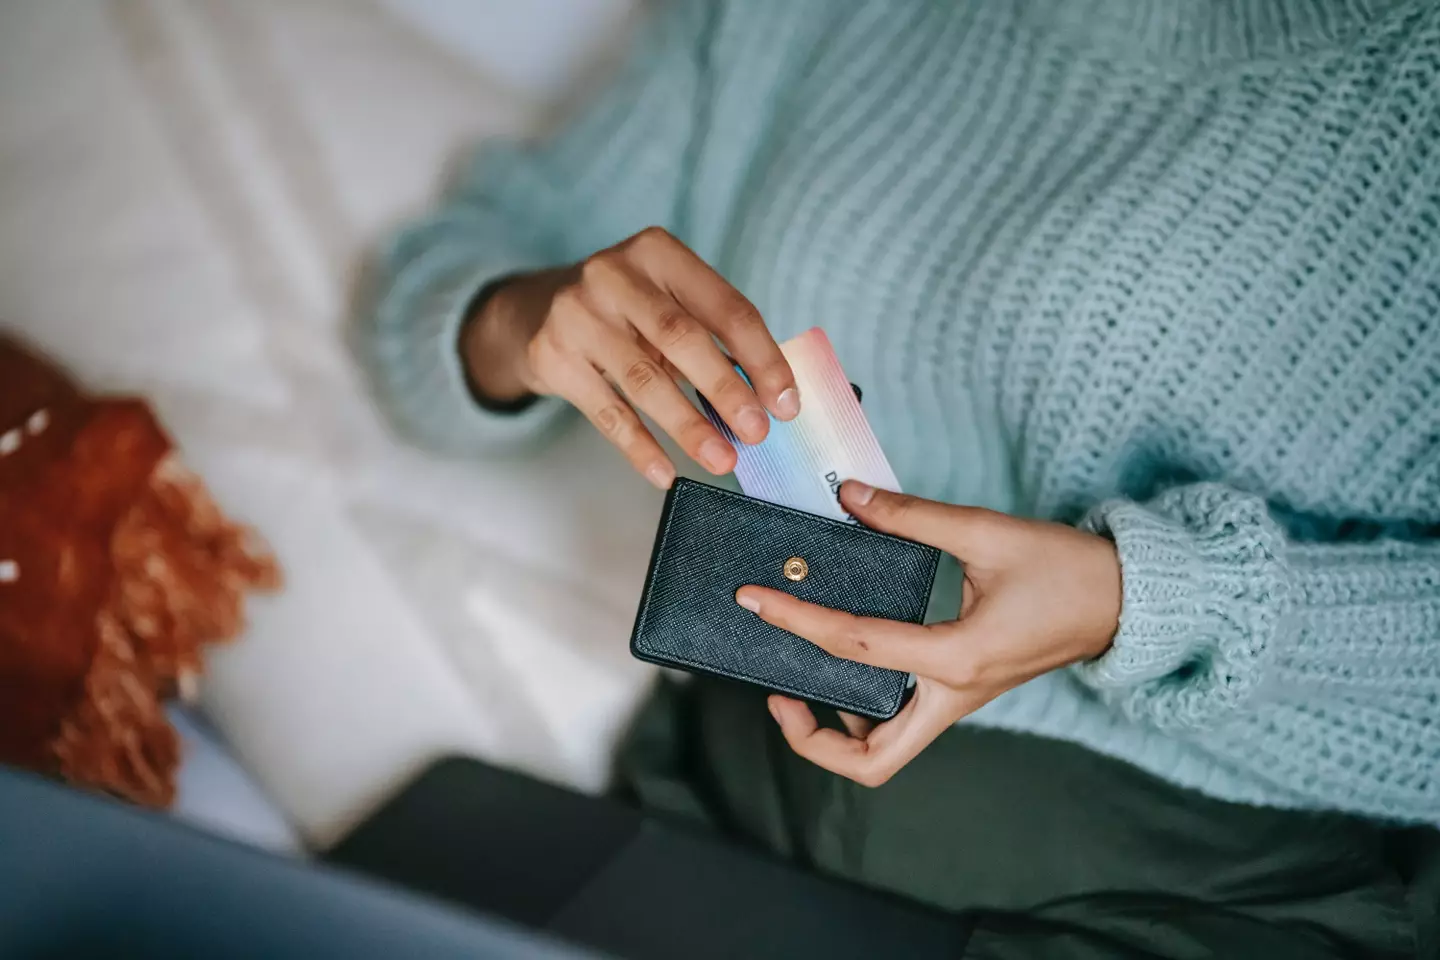 She asked her daughter for an extra £25 per month. Credit; Pexels/Liza Summer